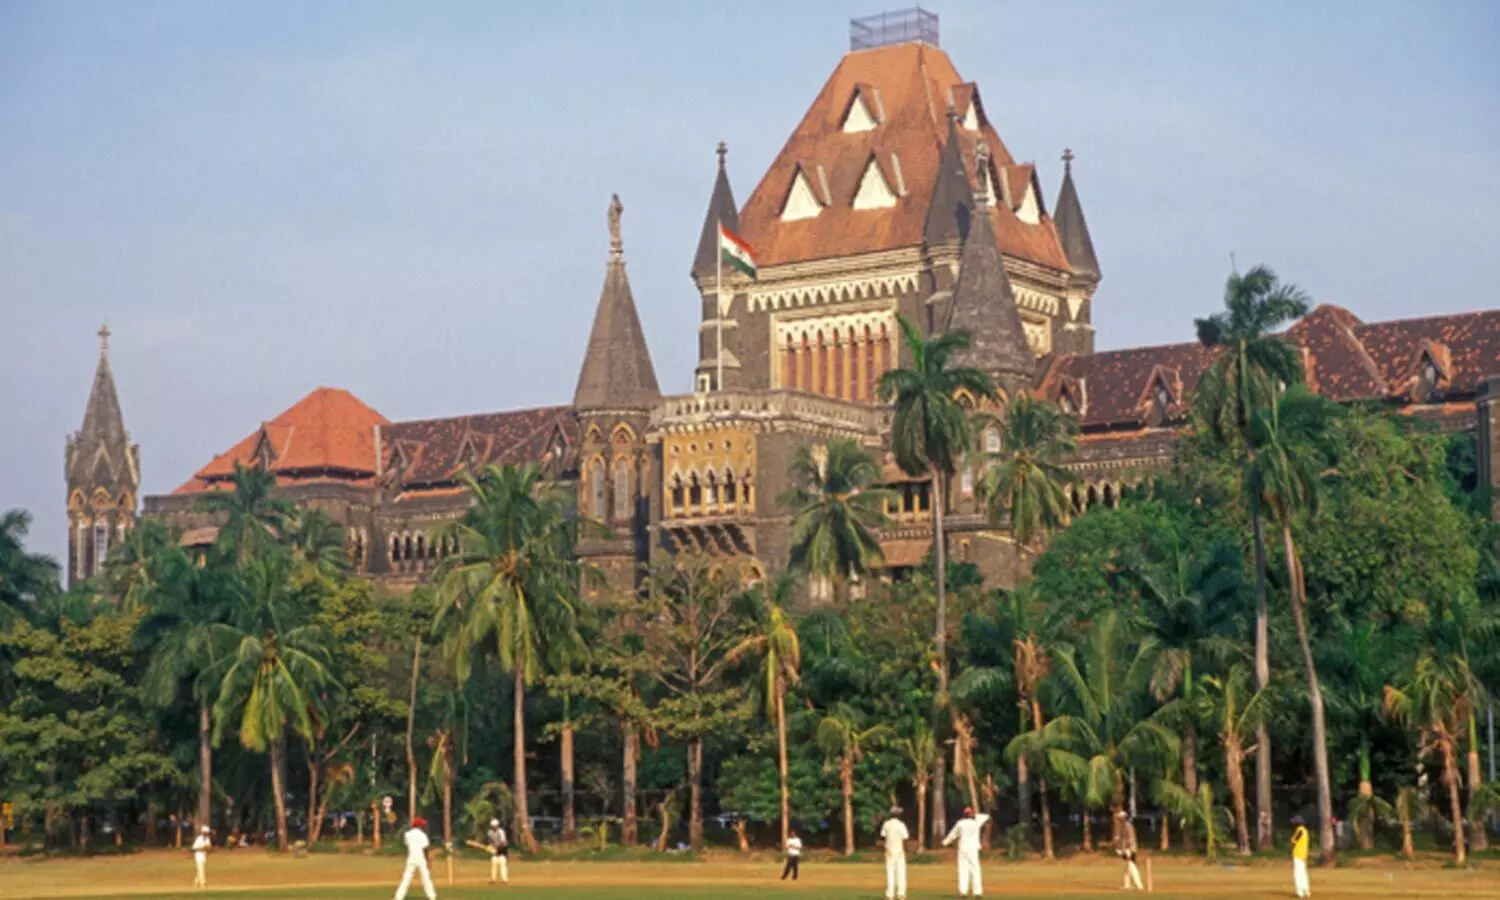 Candidates scoring 192 out of 700 getting admissions: Bombay HC asks Centre to reconsider Medical Education Policy